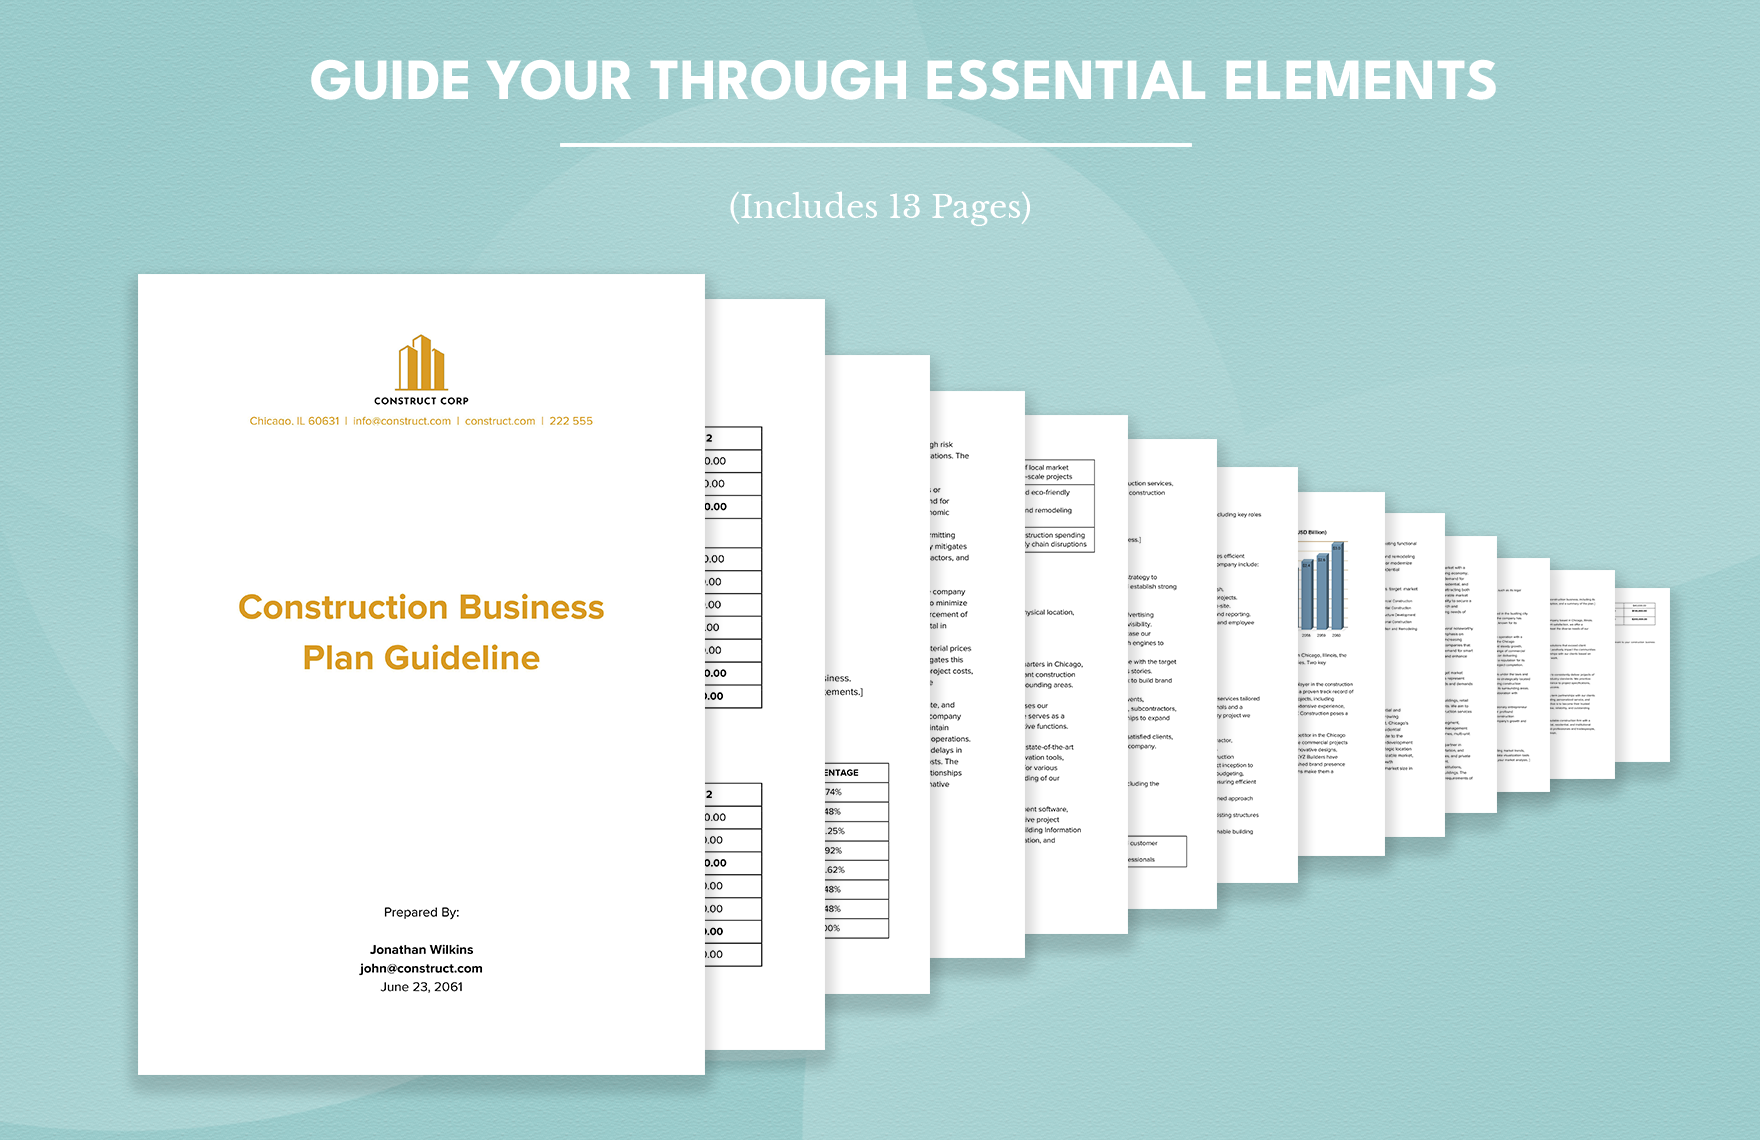 Construction Business Plan Guidelines